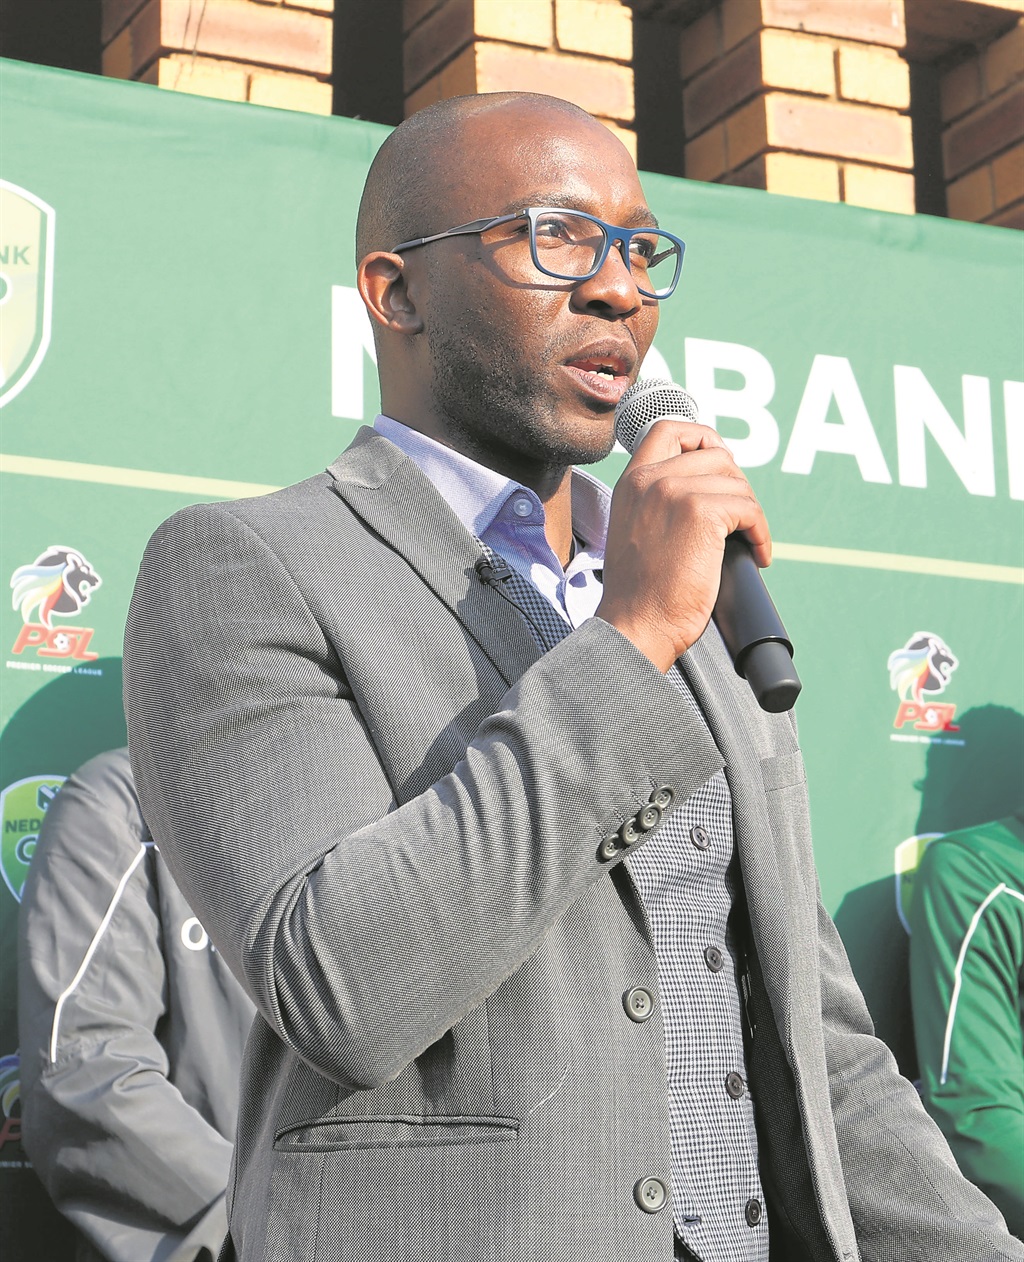 Nedbank’s sponsorship manager for football properties Tutu Skosana is certain the cup final will draw a good crowd.